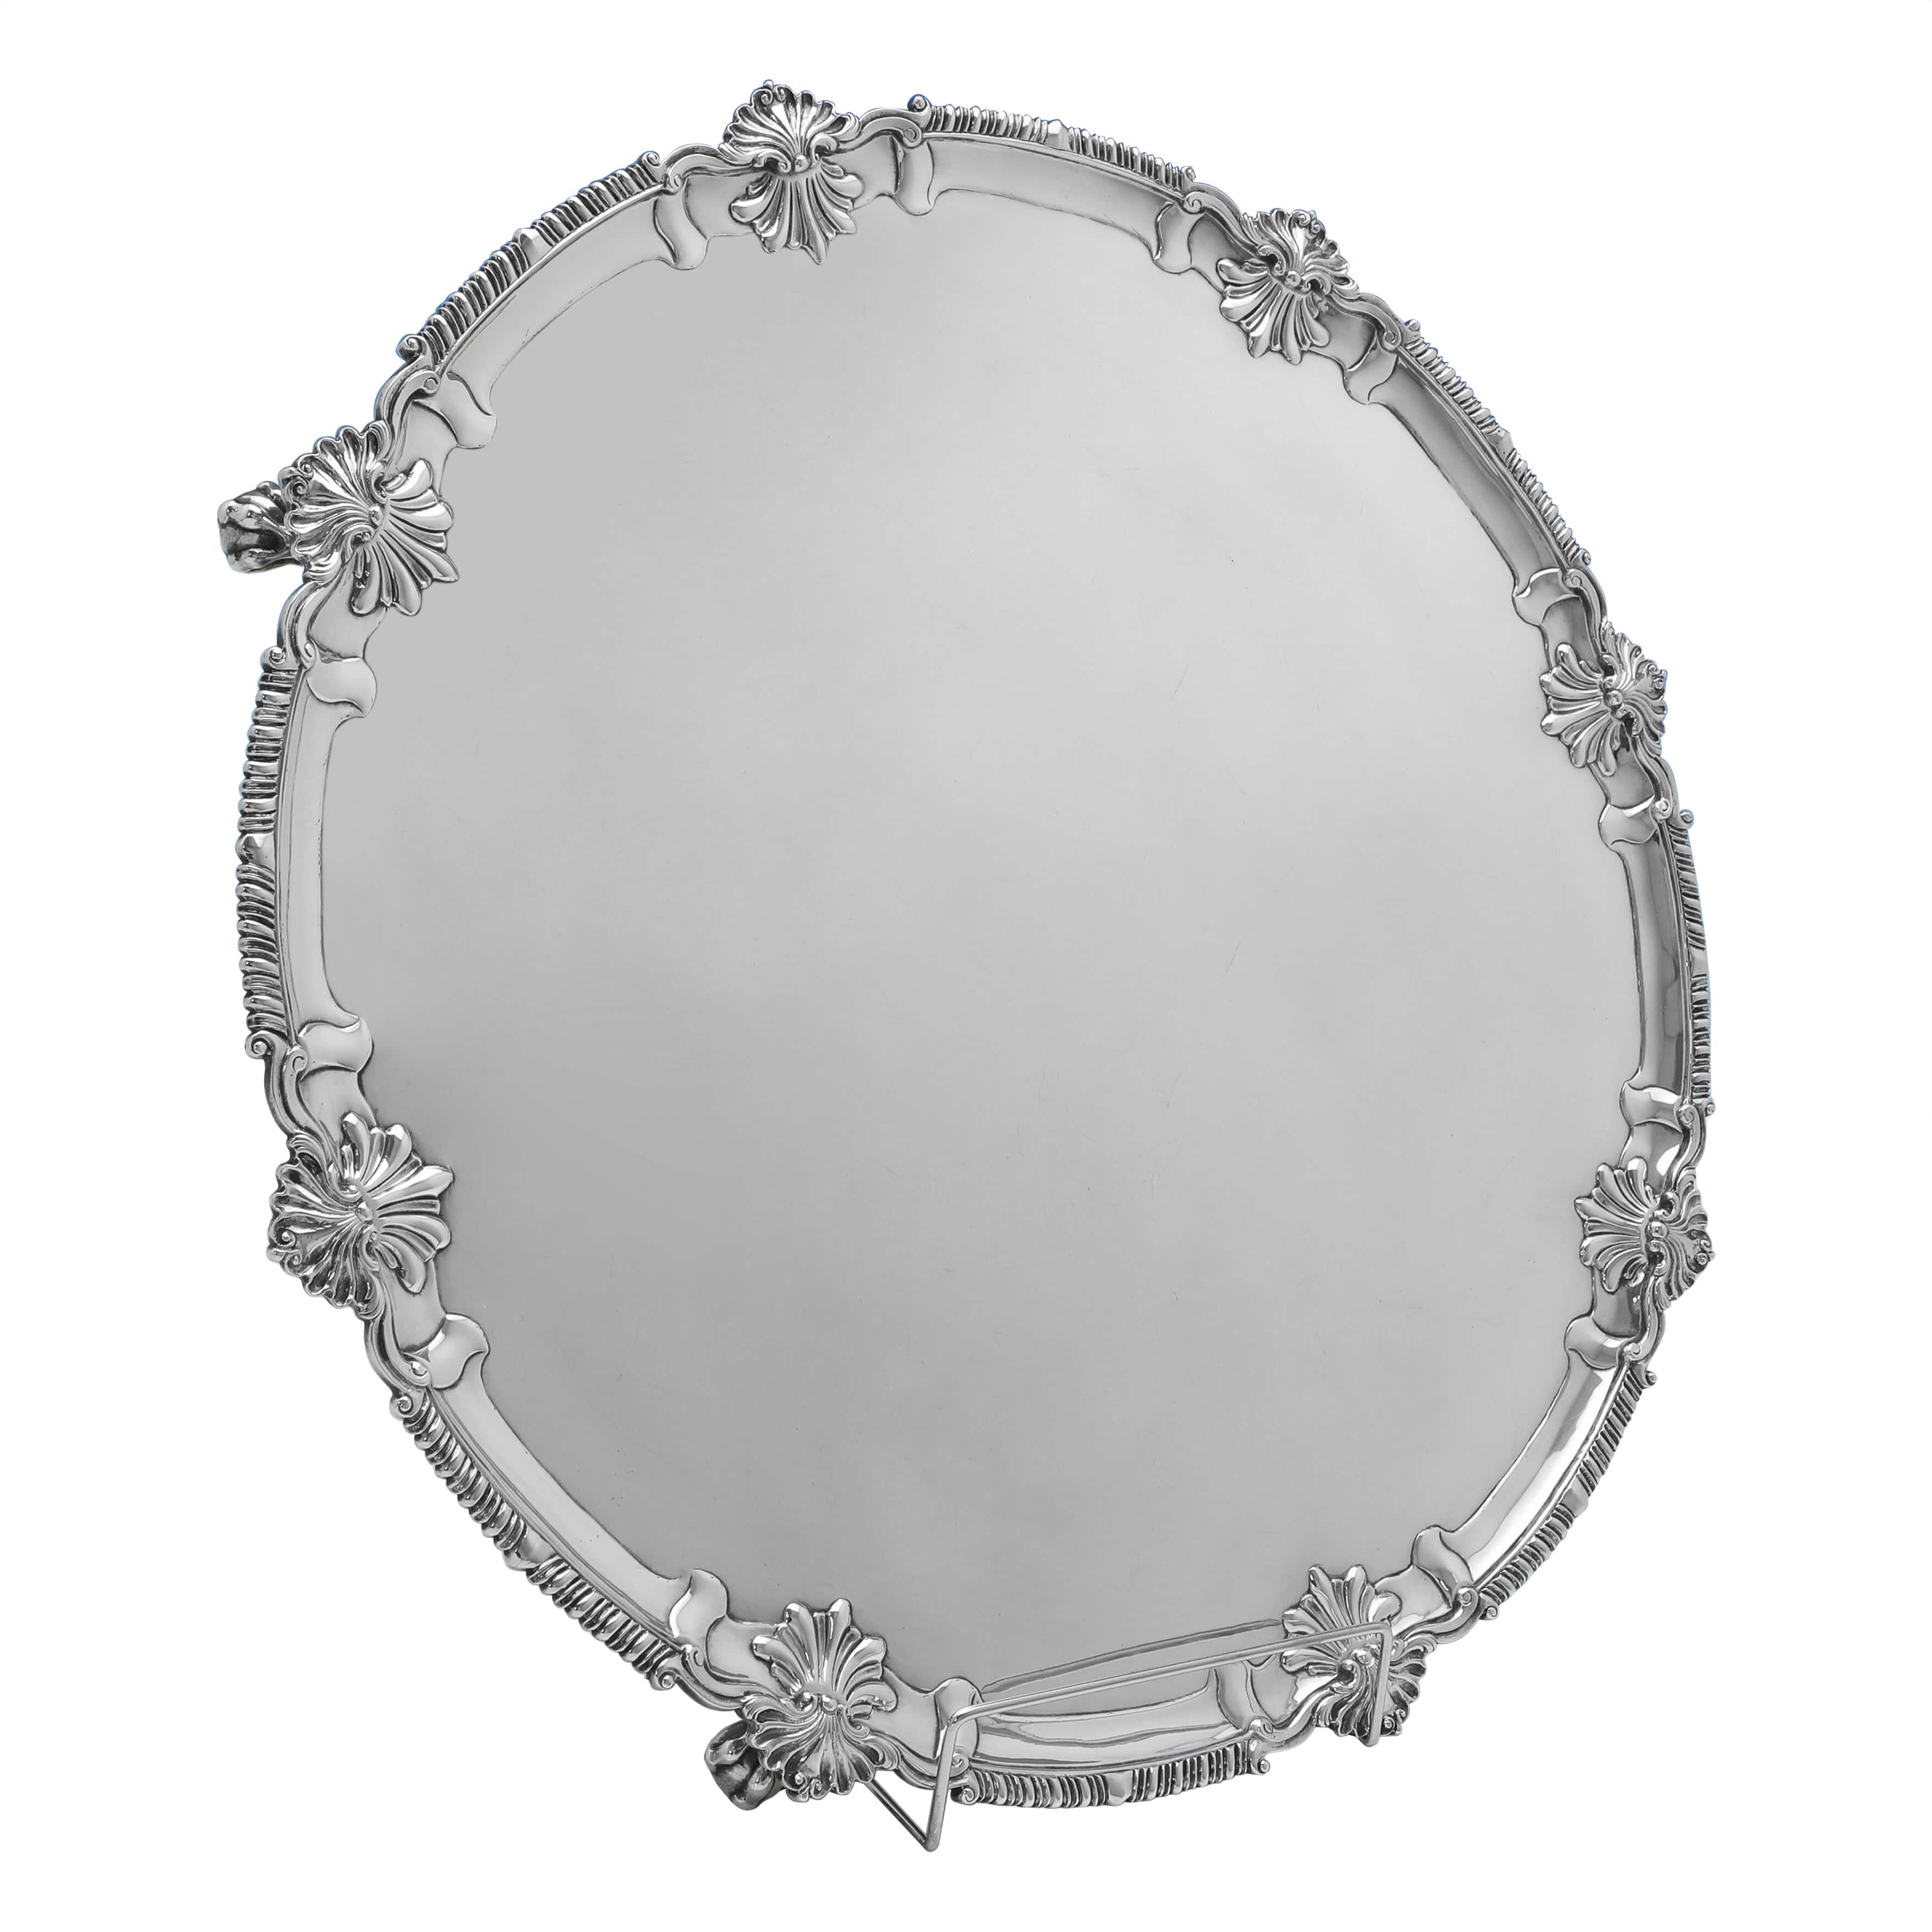 Rococo Design Antique George III Sterling Silver Salver, Richard Rugg 1772 For Sale